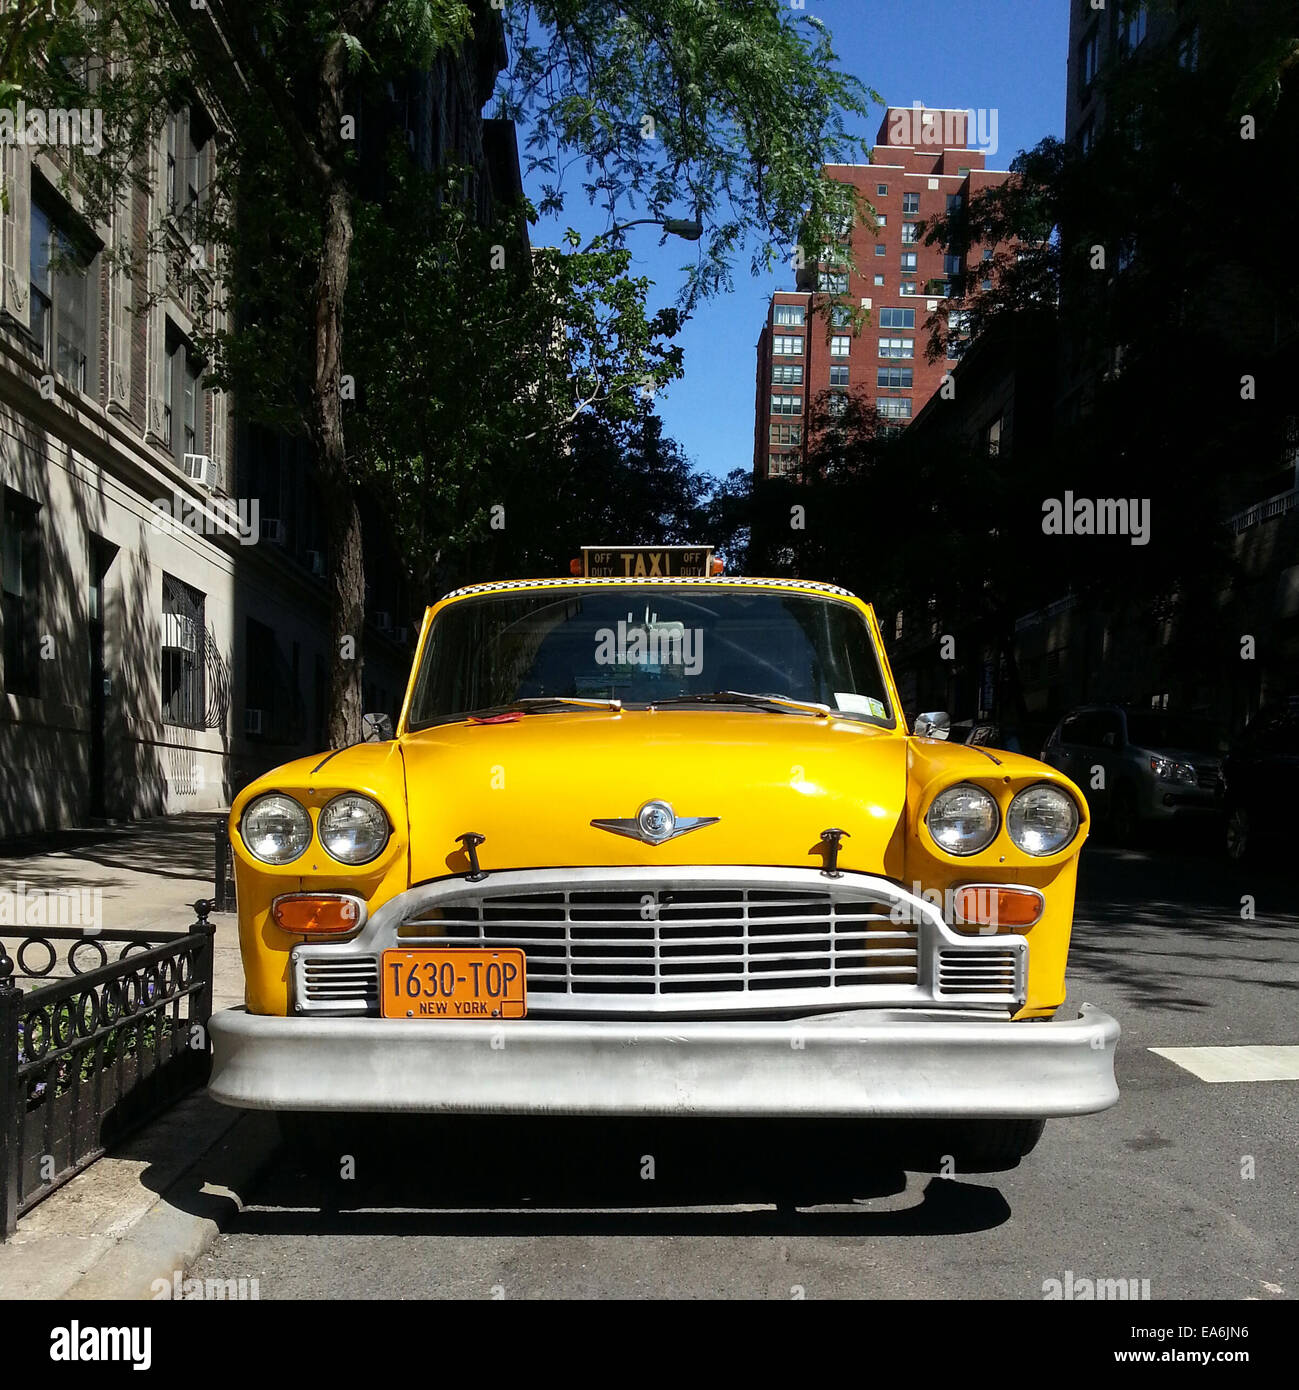 Yellow cab parked on the street, Manhattan, New York, United States Stock Photo